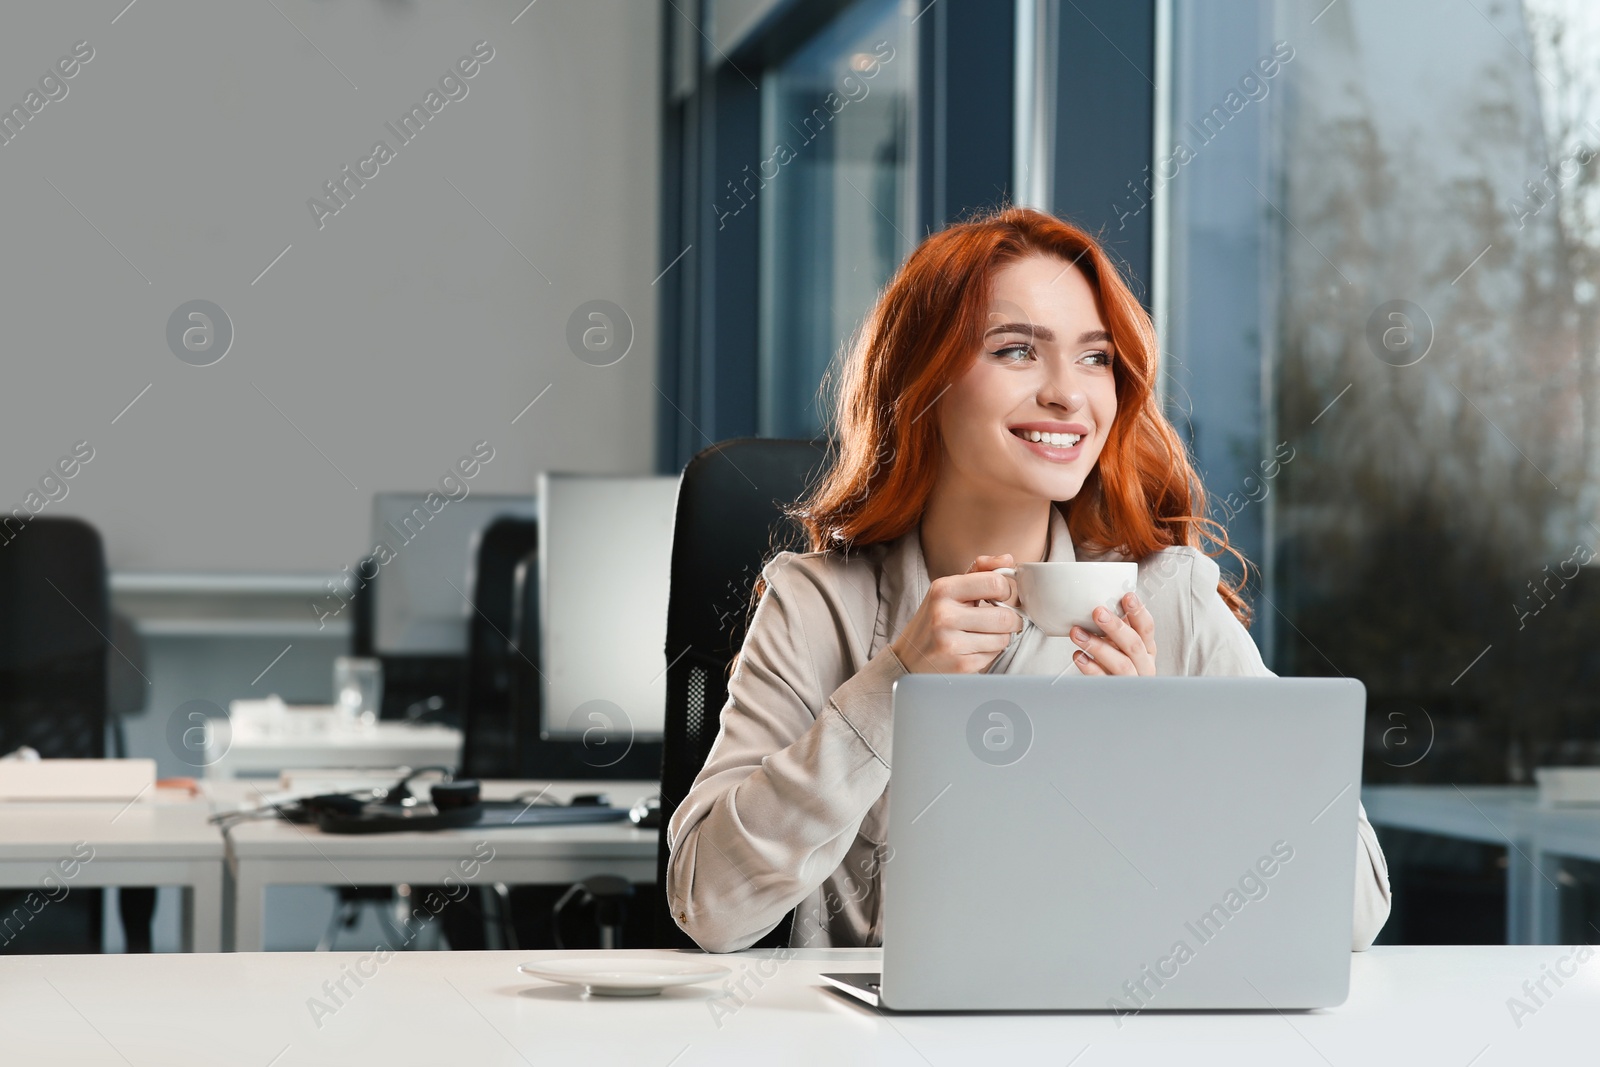 Photo of Happy woman with cup of drink working on laptop at white desk in office